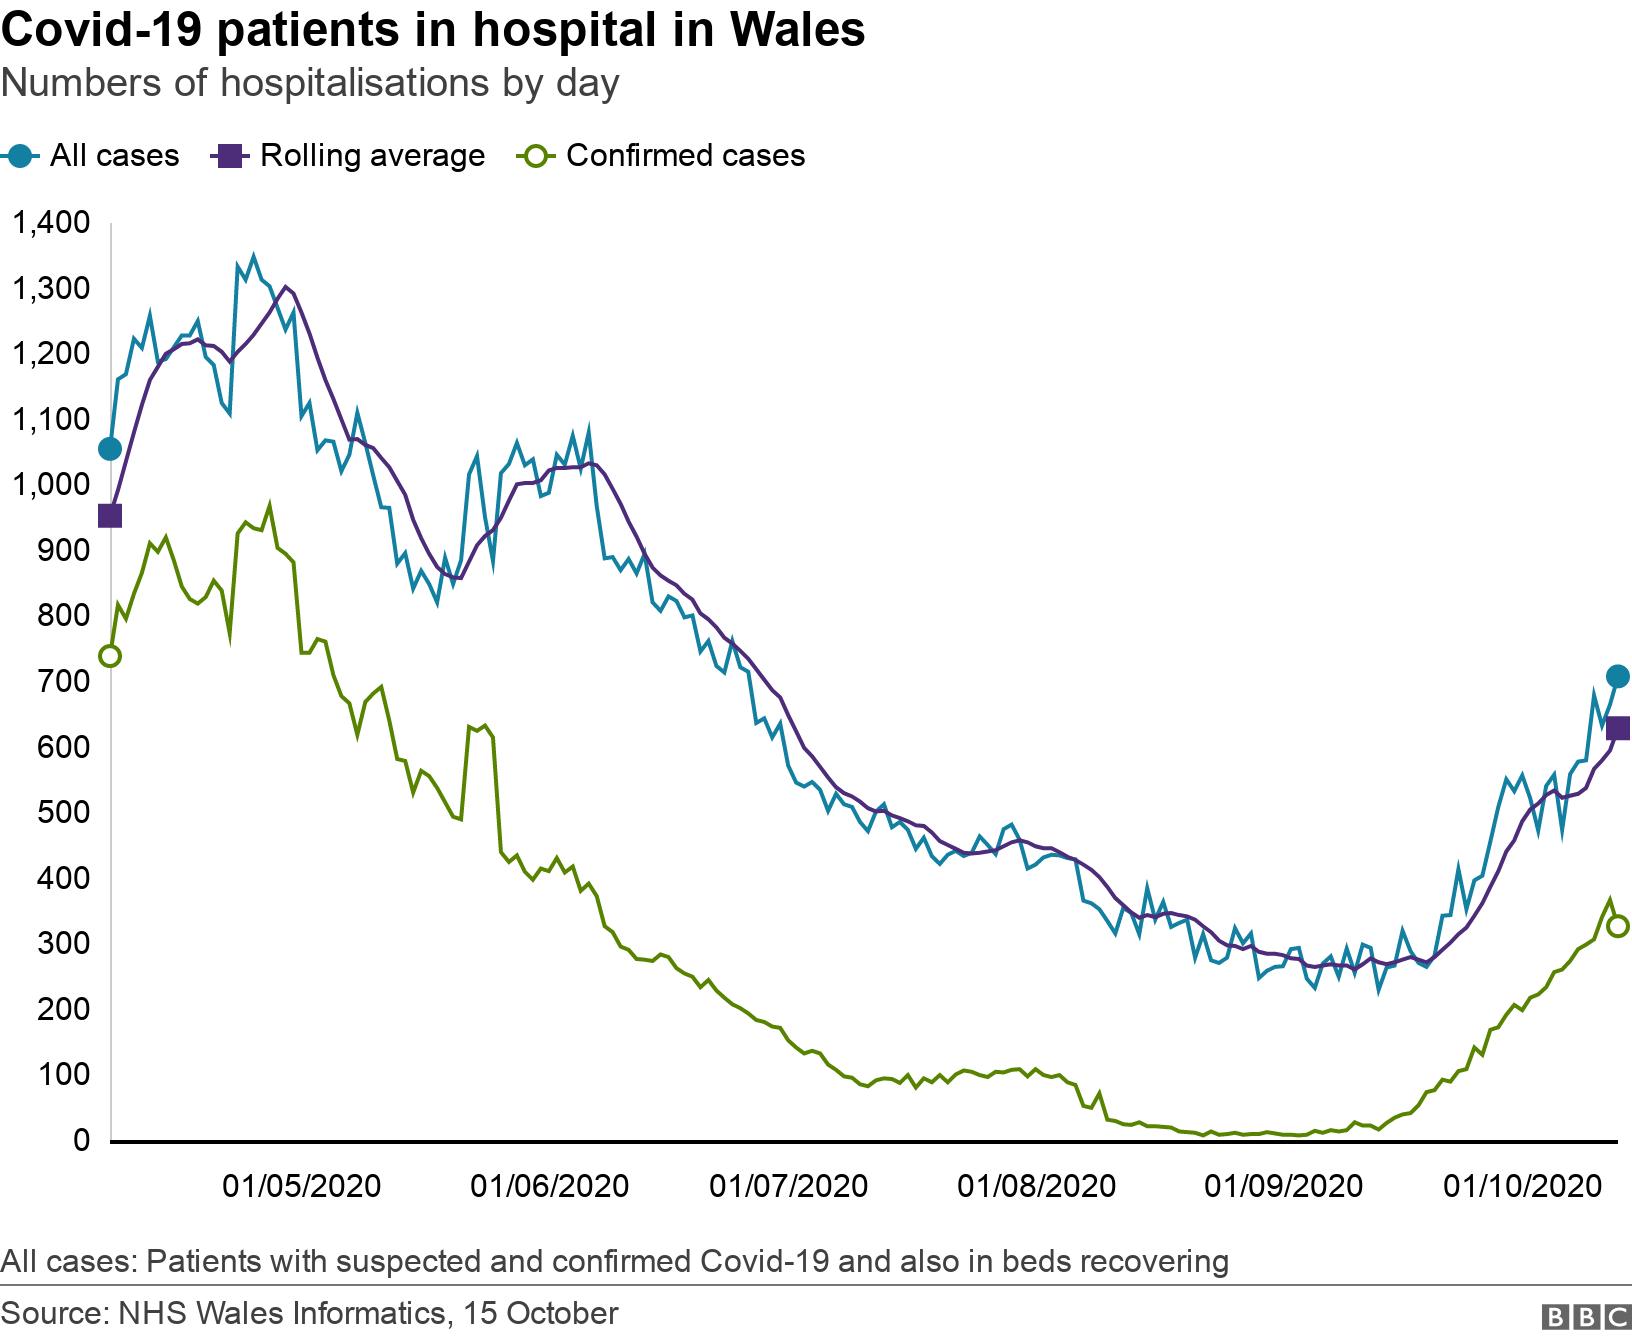 Covid-19 patients in hospital in Wales. Numbers of hospitalisations by day. All cases: Patients with suspected and confirmed Covid-19 and also in beds recovering.